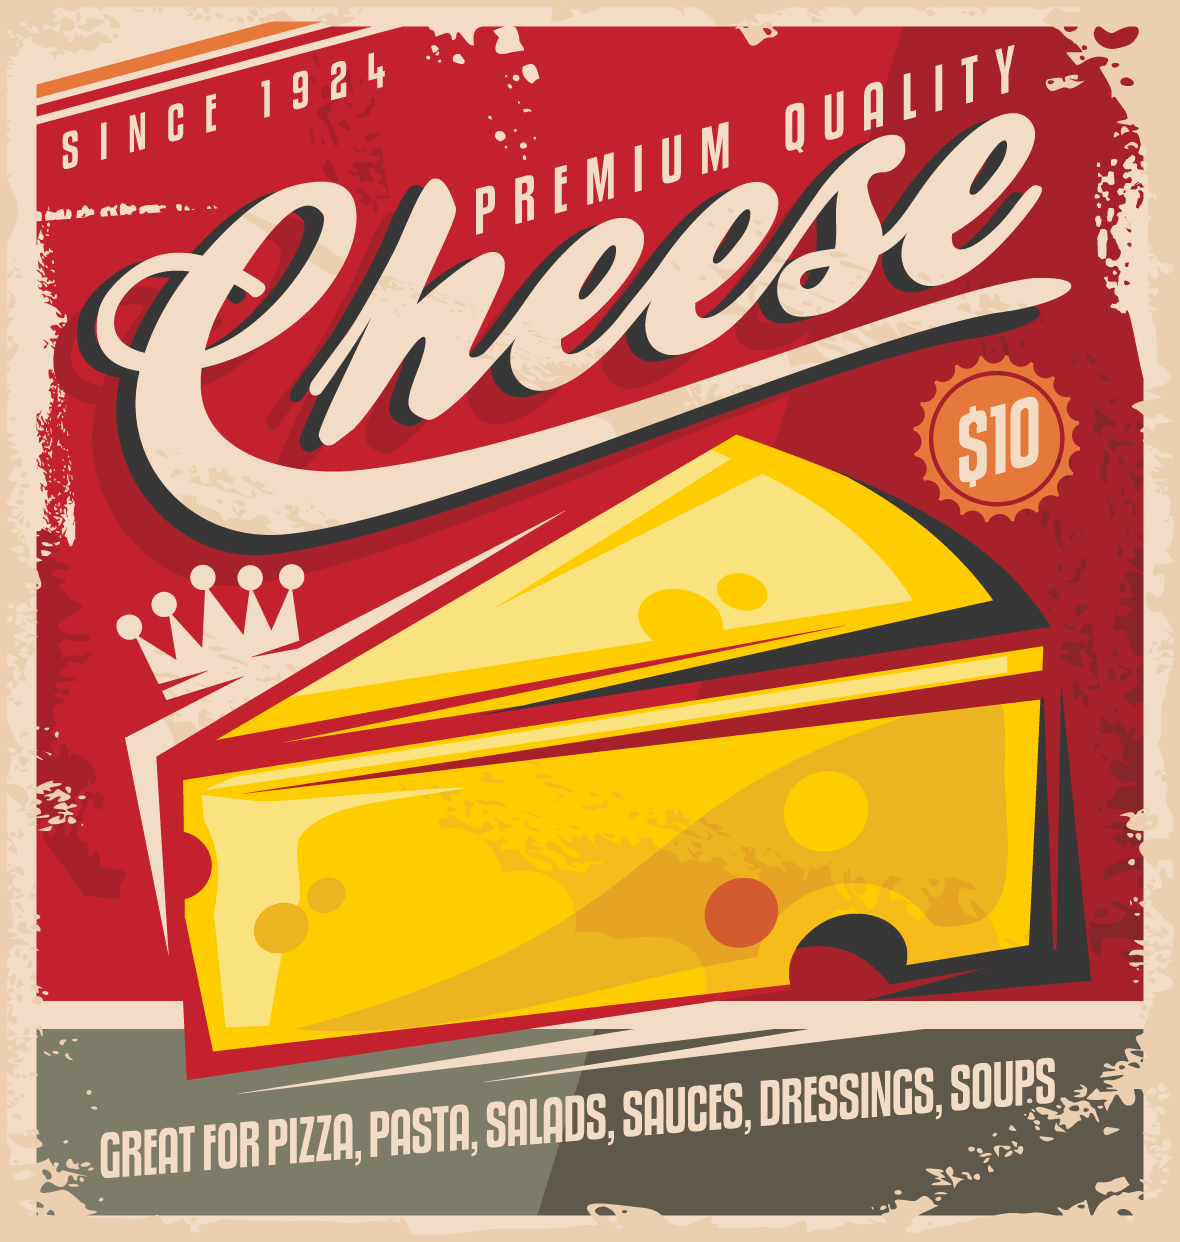 Vintage Cheese Poster with red background and a large wedge of cheddar cheese.